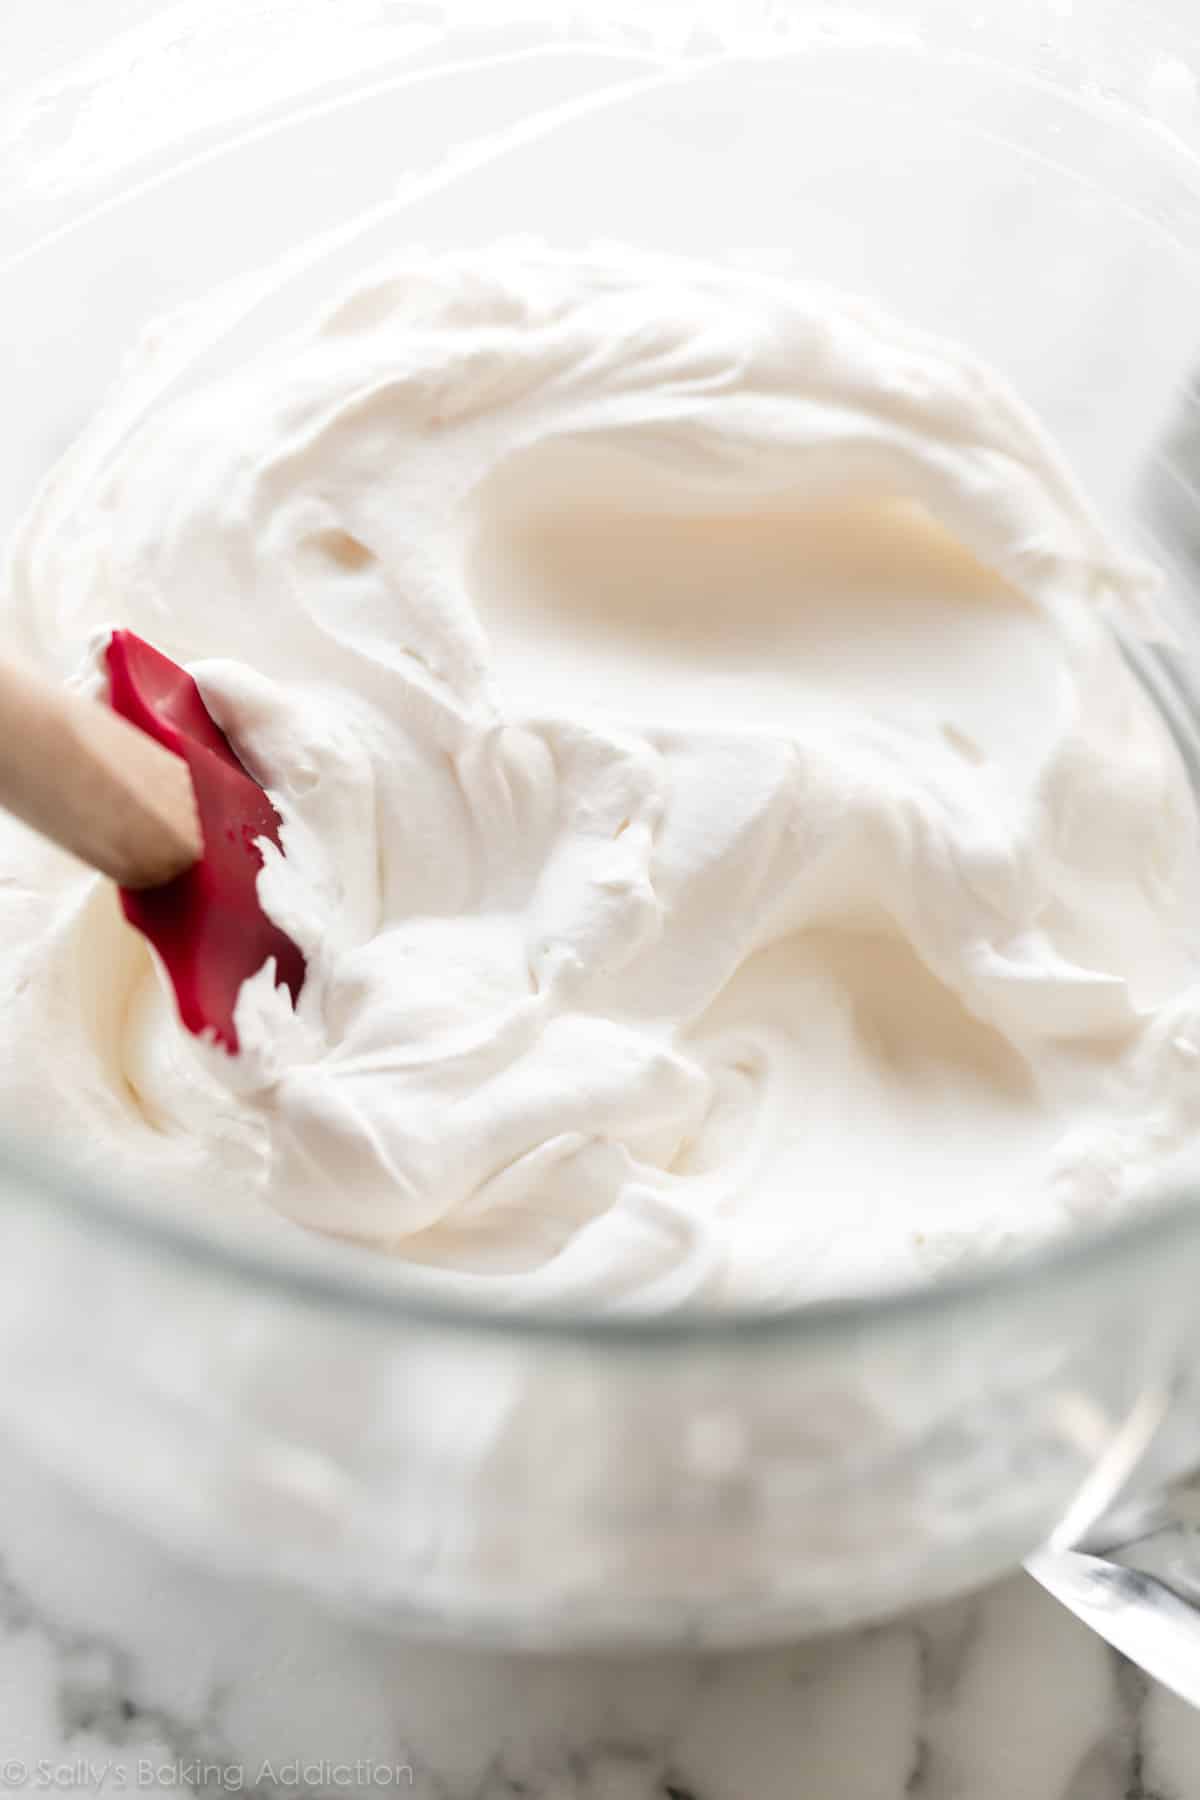 Whipped cream in glass bowl